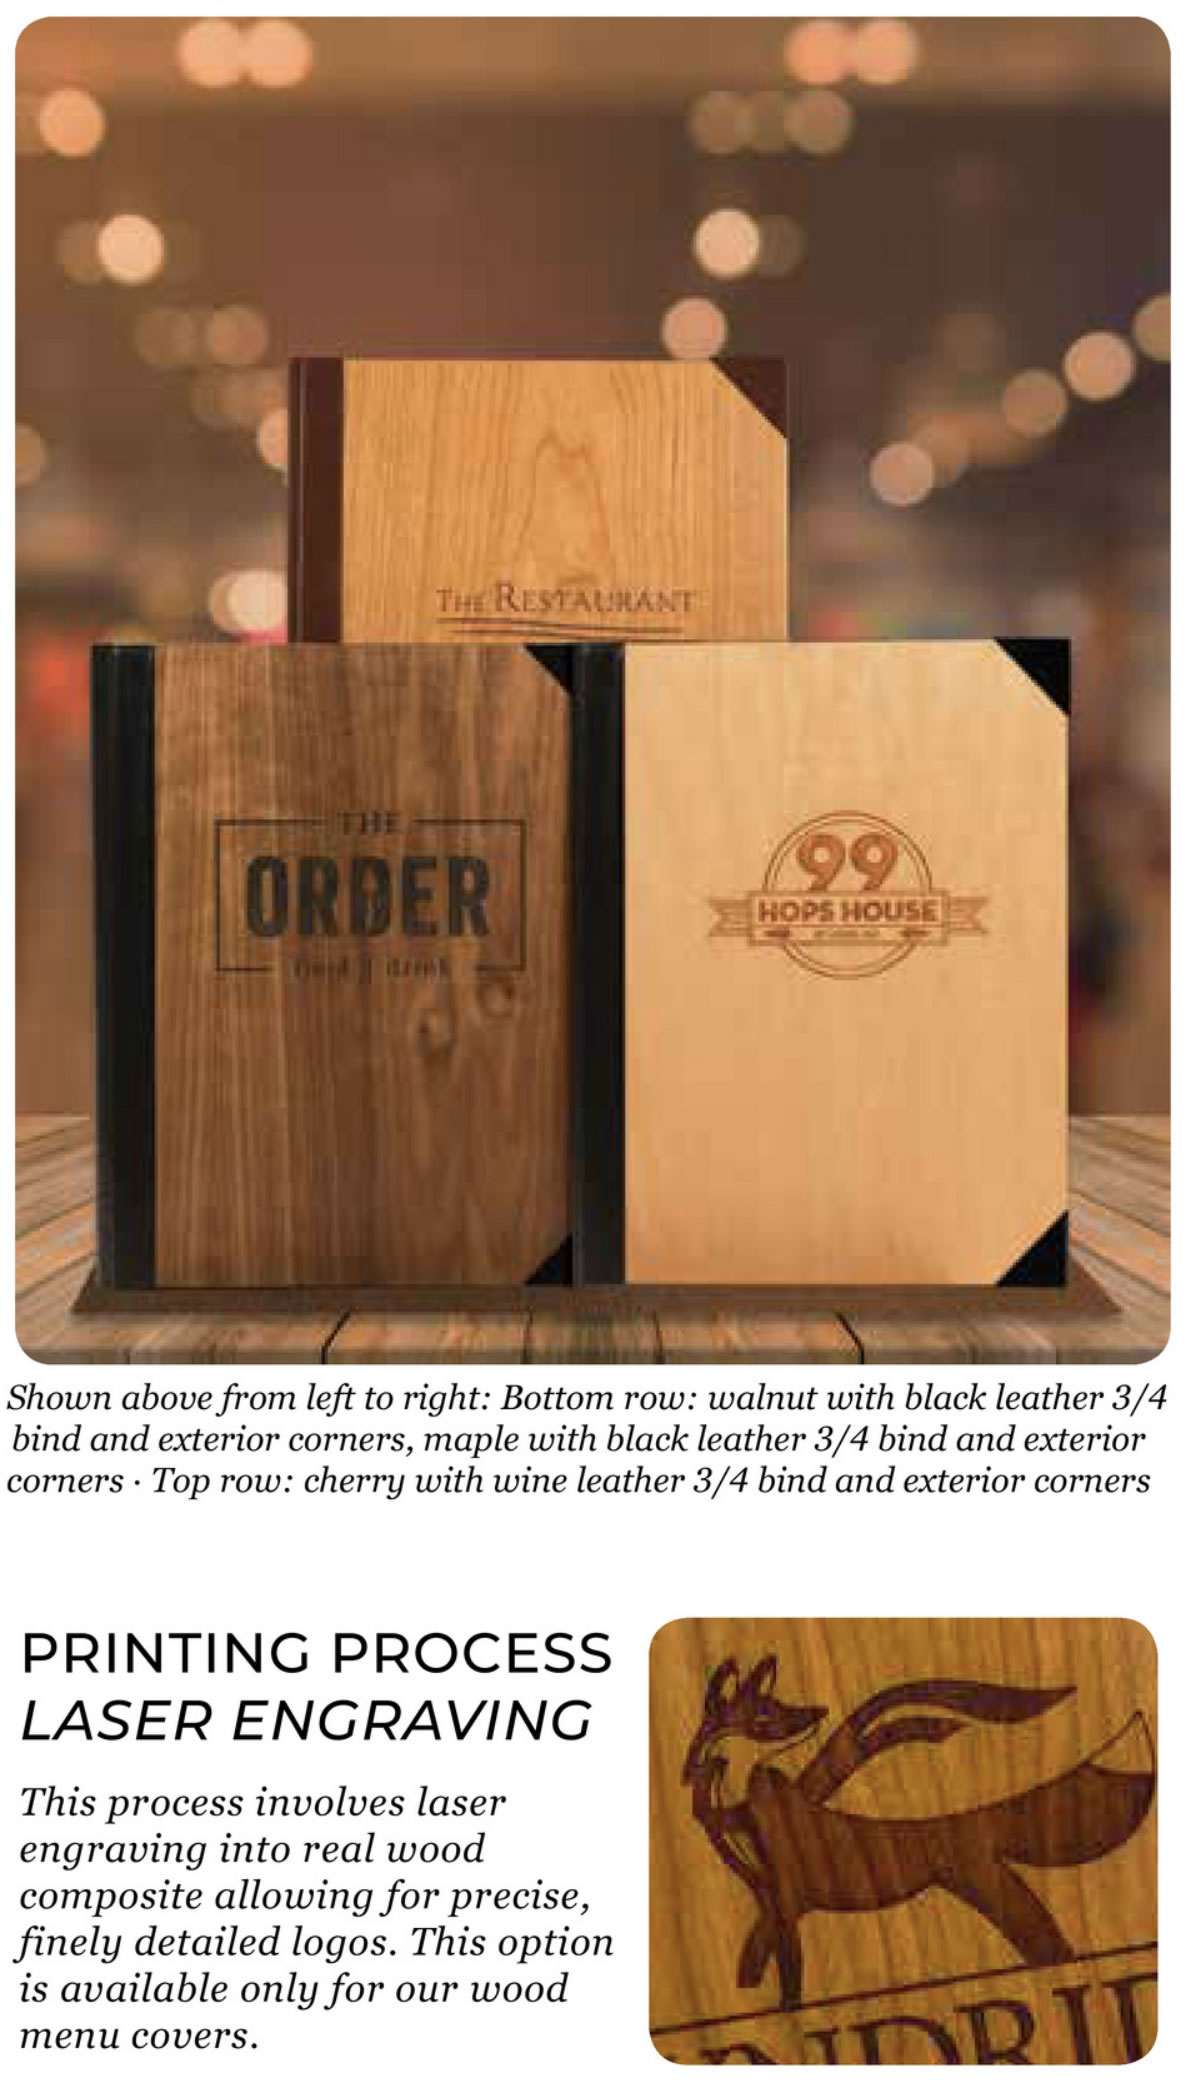 Laser Engraving for your valued Menu Covers.